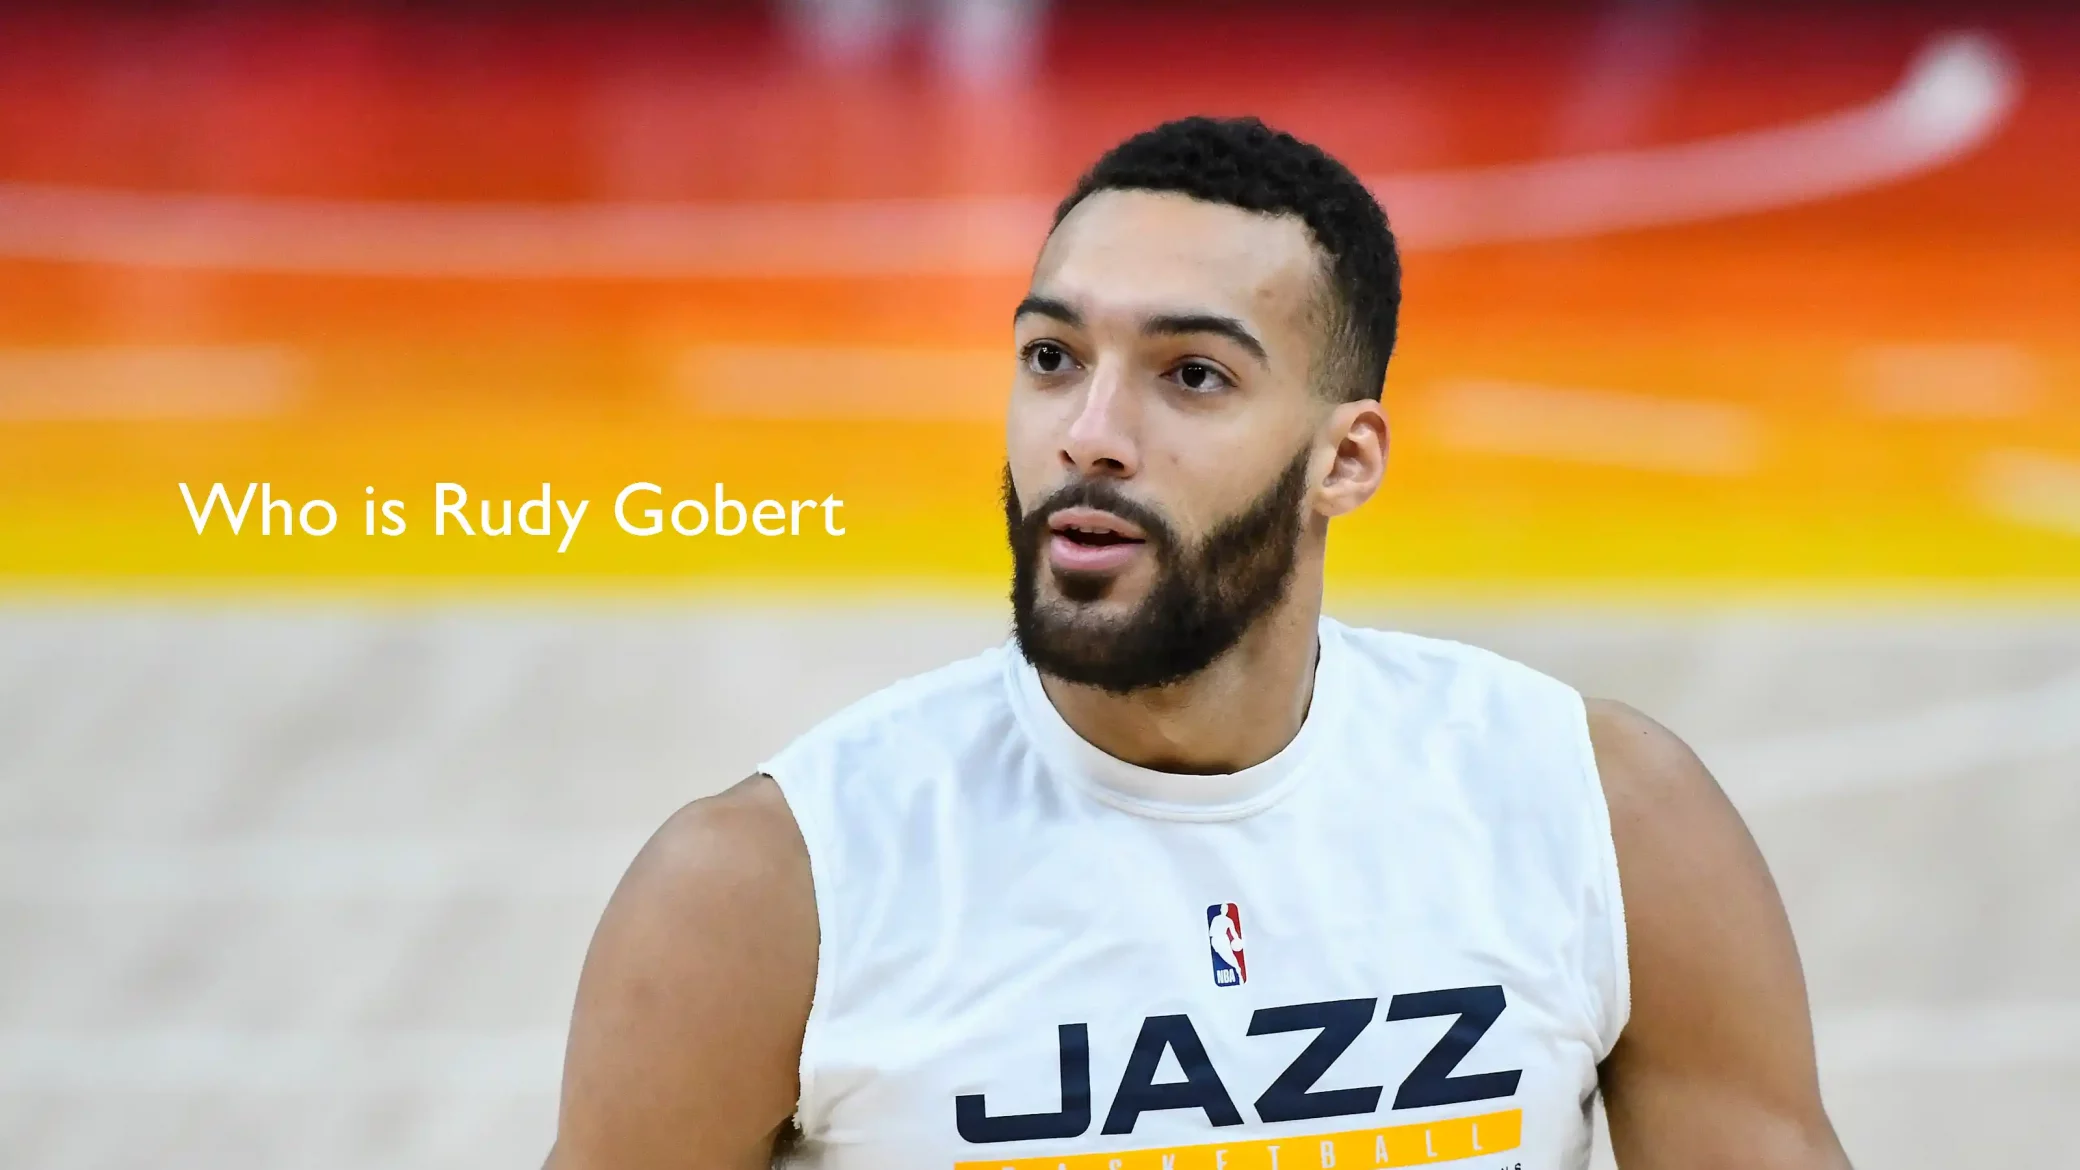 Is Riley Reid and Rudy Gobert's relationship true? All the details 